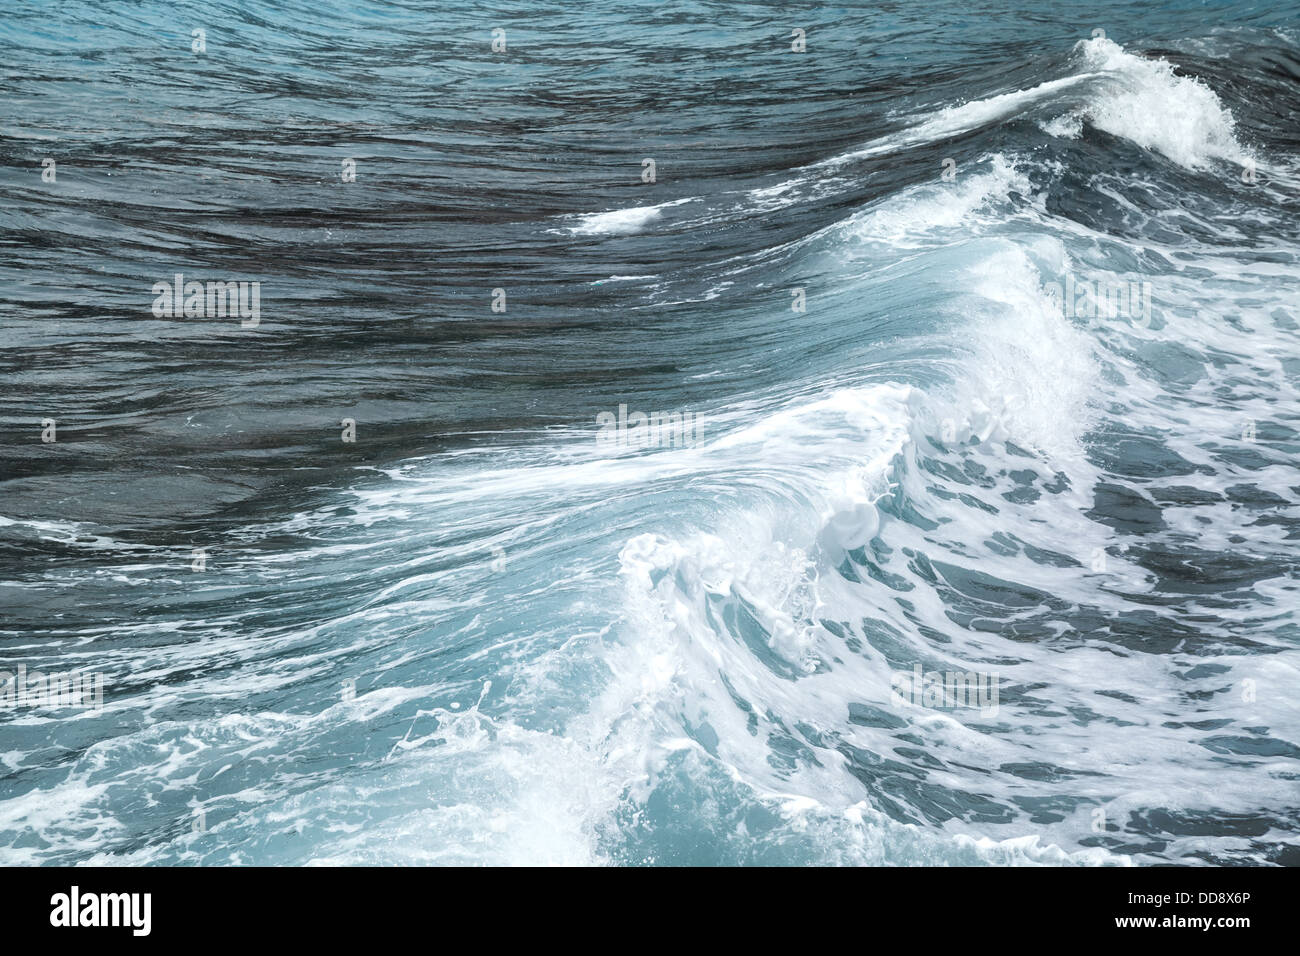 Big stormy waves on the Adriatic sea Stock Photo